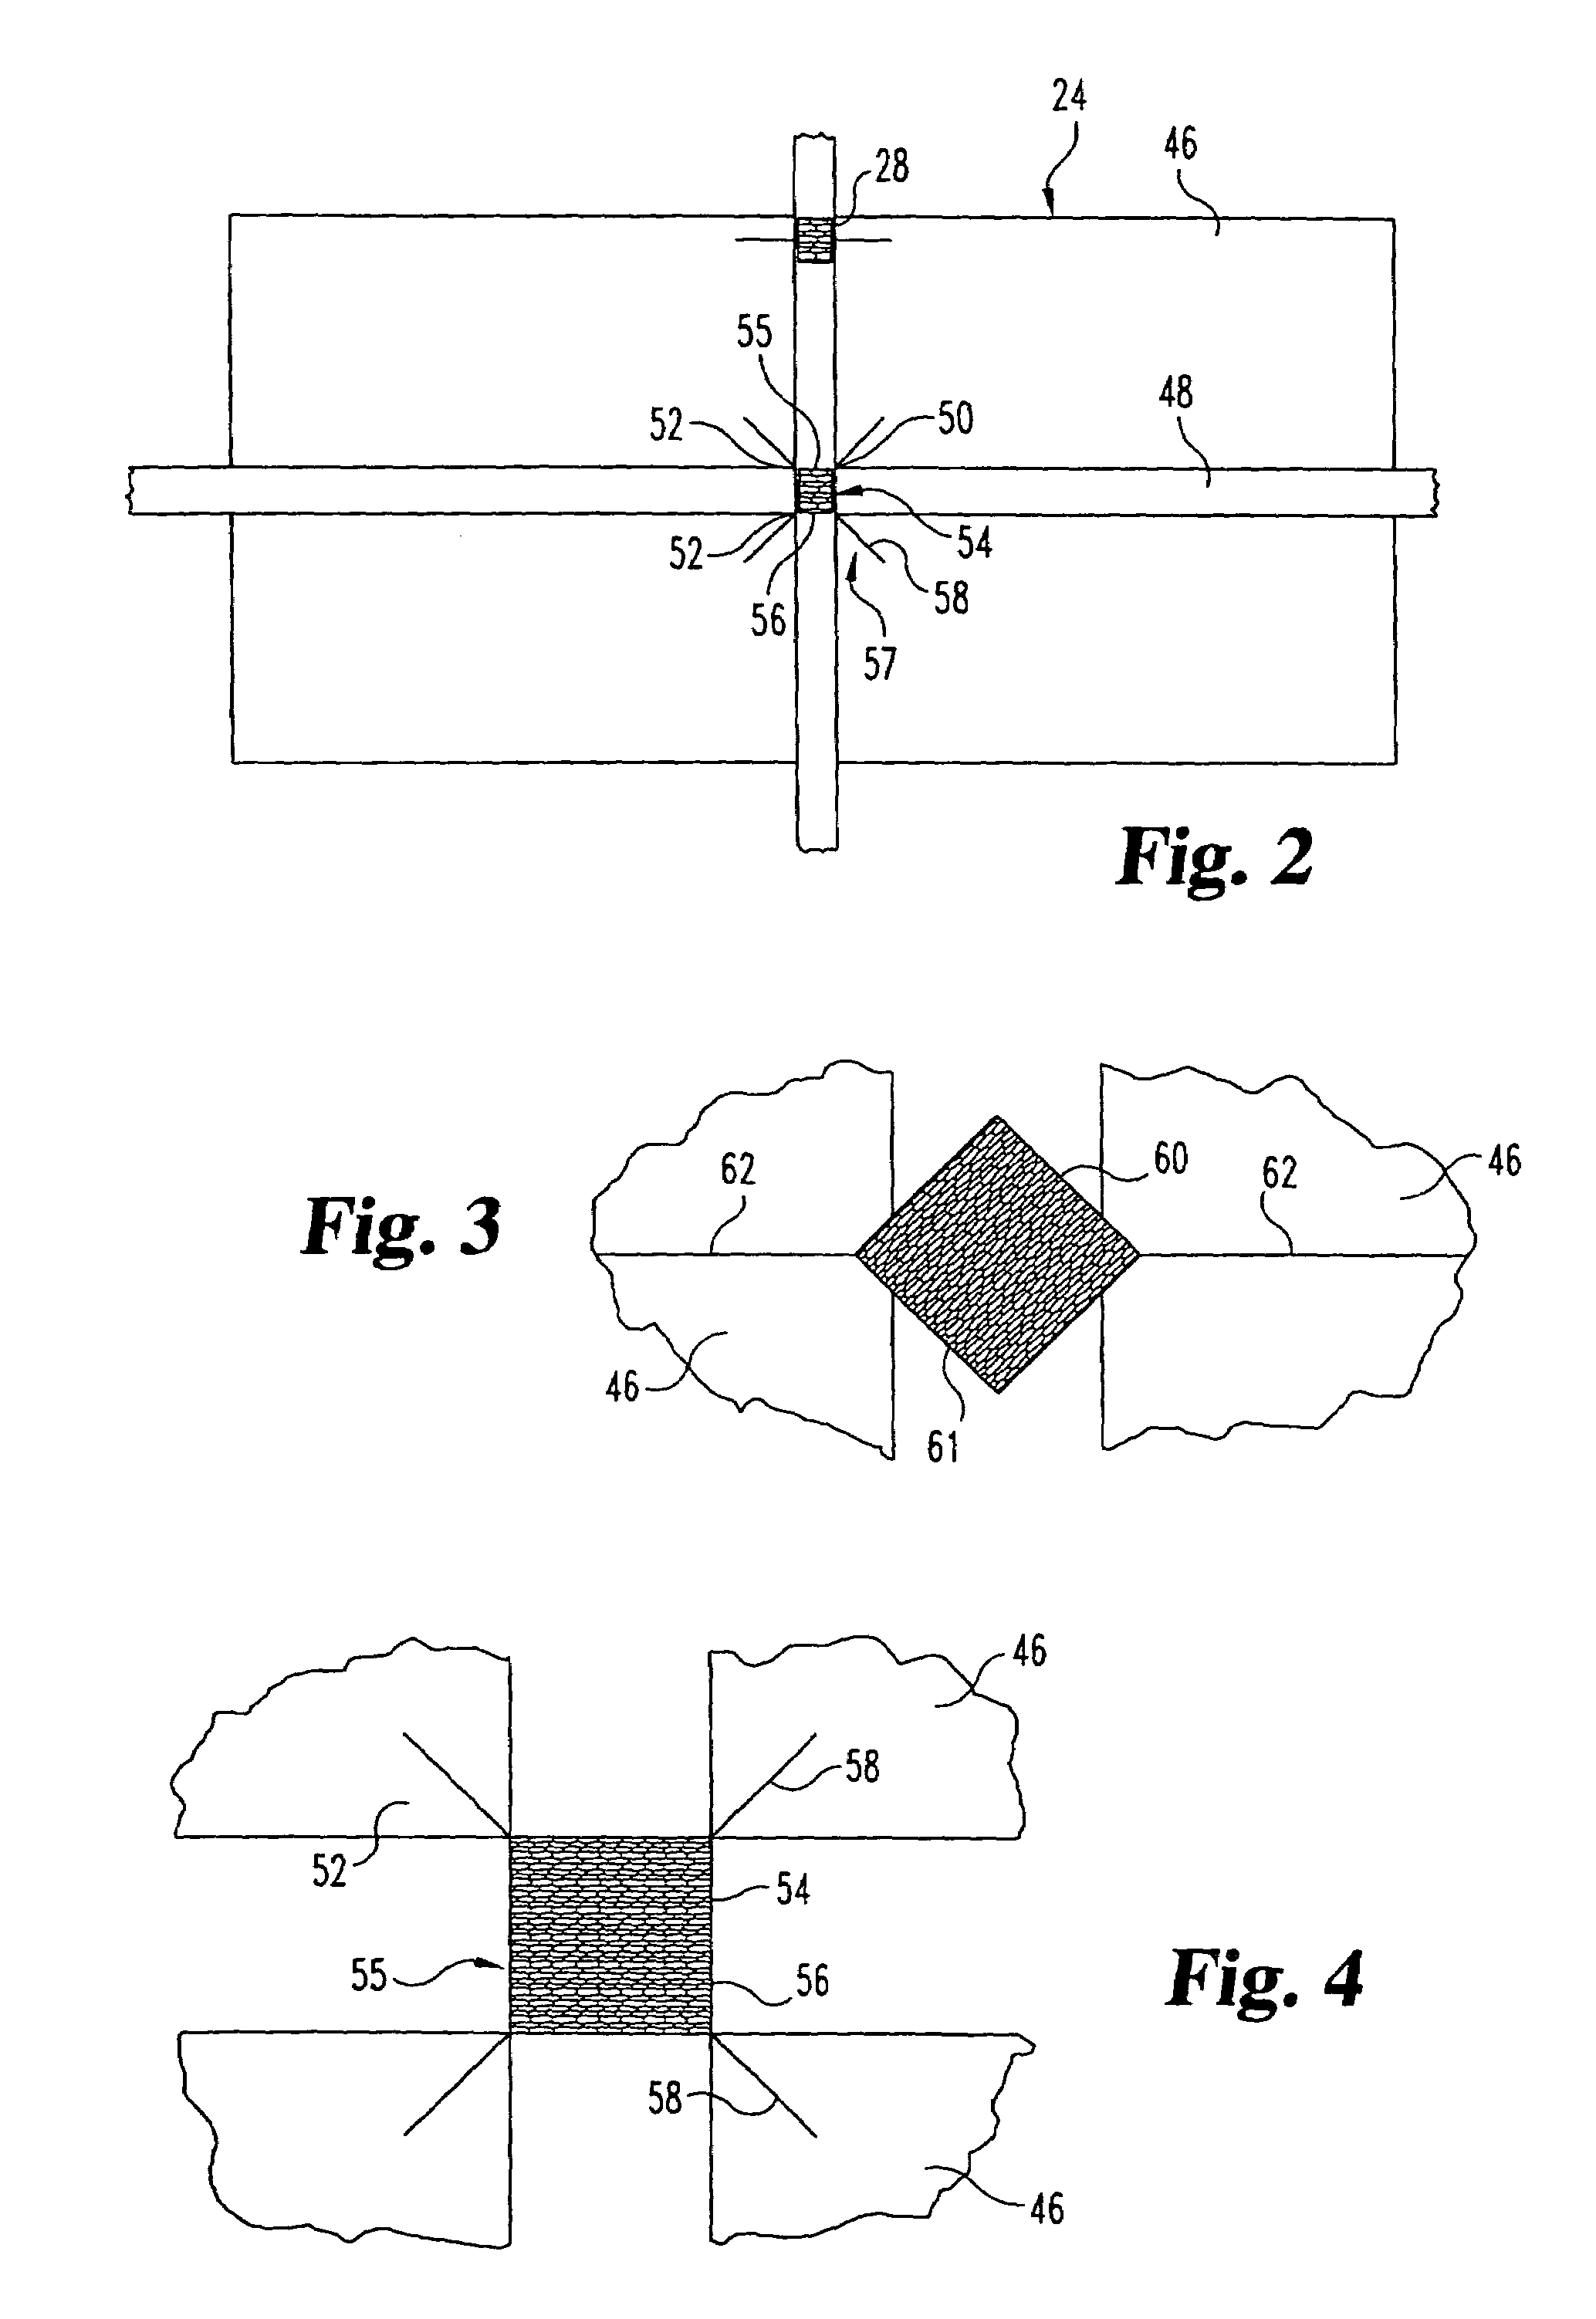 Radio frequency security system, method for a building facility or the like, and apparatus and methods for remotely monitoring the status of fire extinguishers